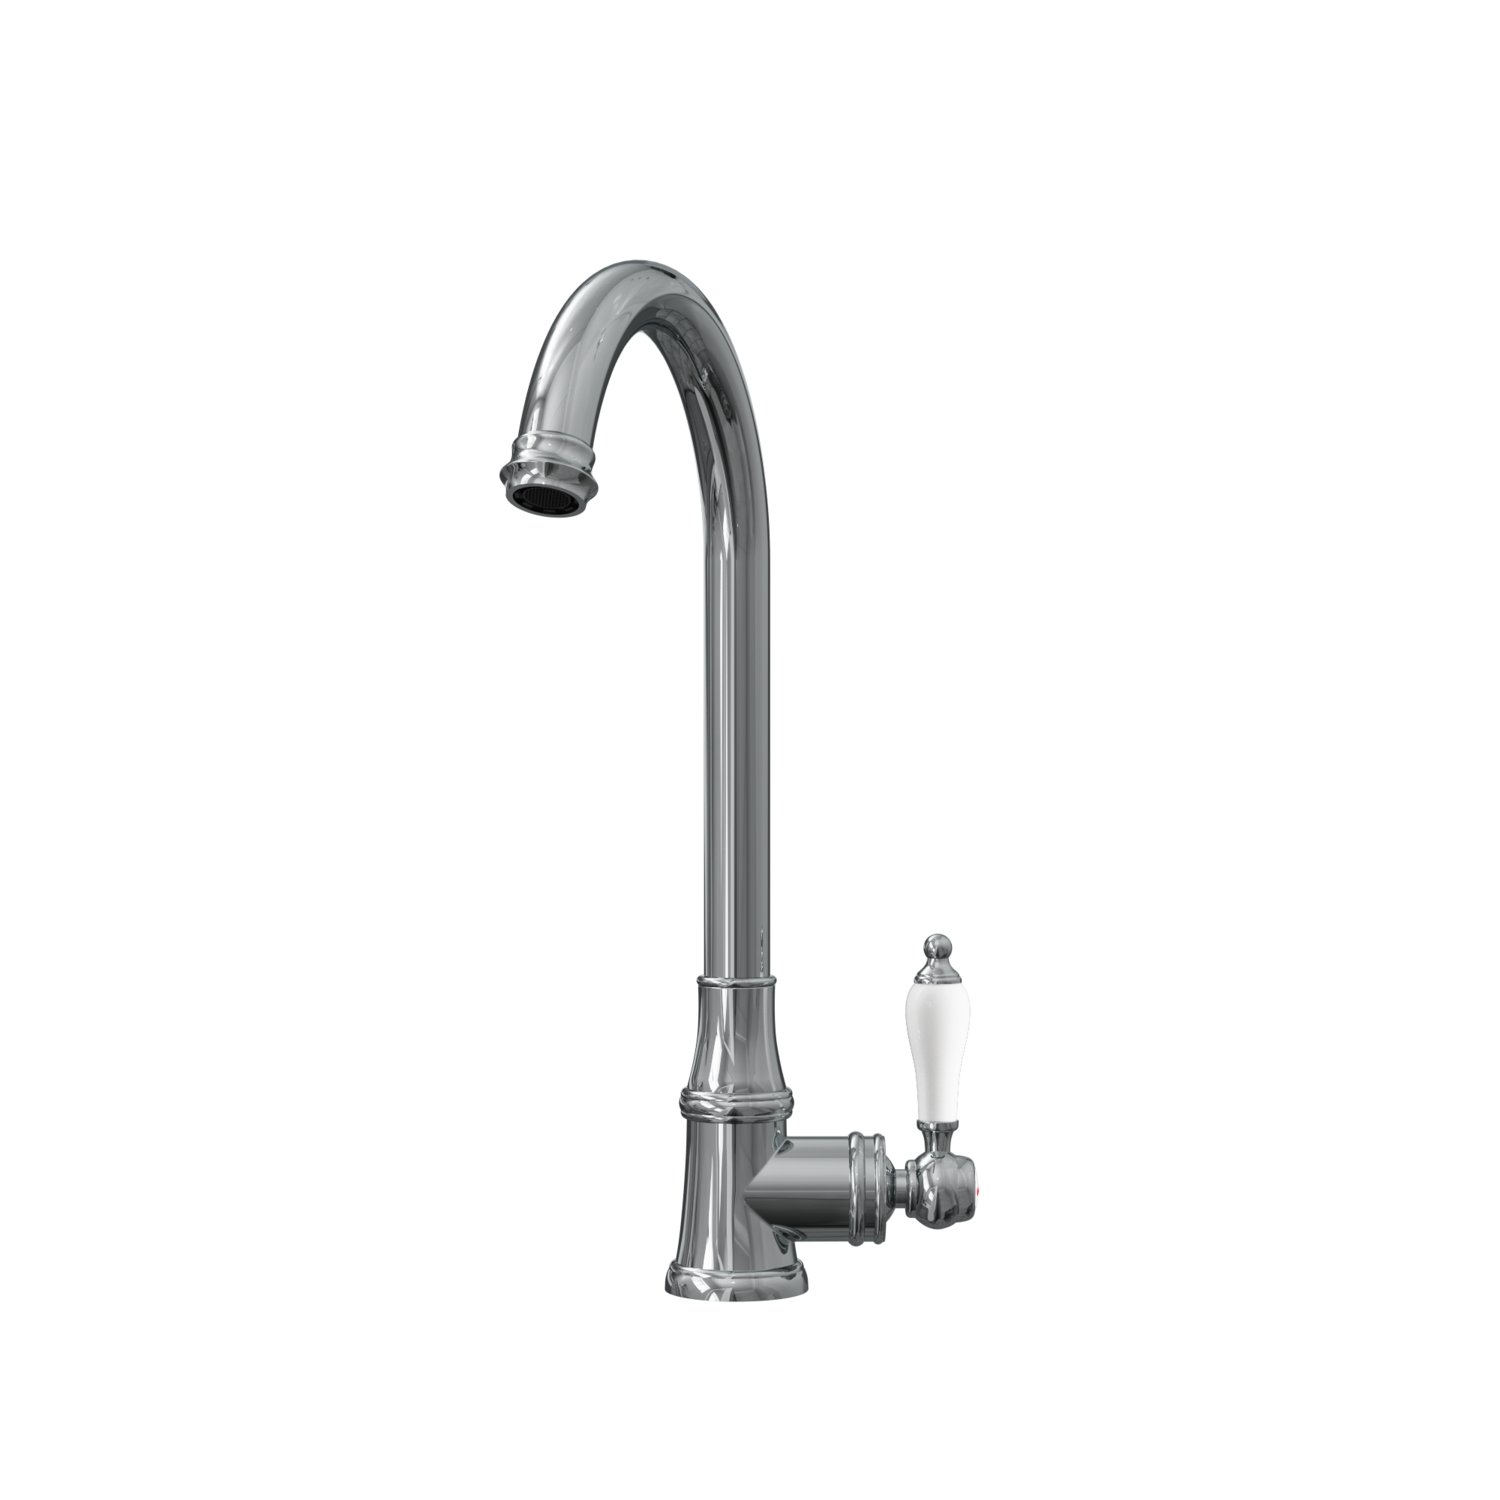 Taylor & Moore Hastings Traditional Kitchen Mixer Tap with Swivel Spout & Single Lever - Chrome